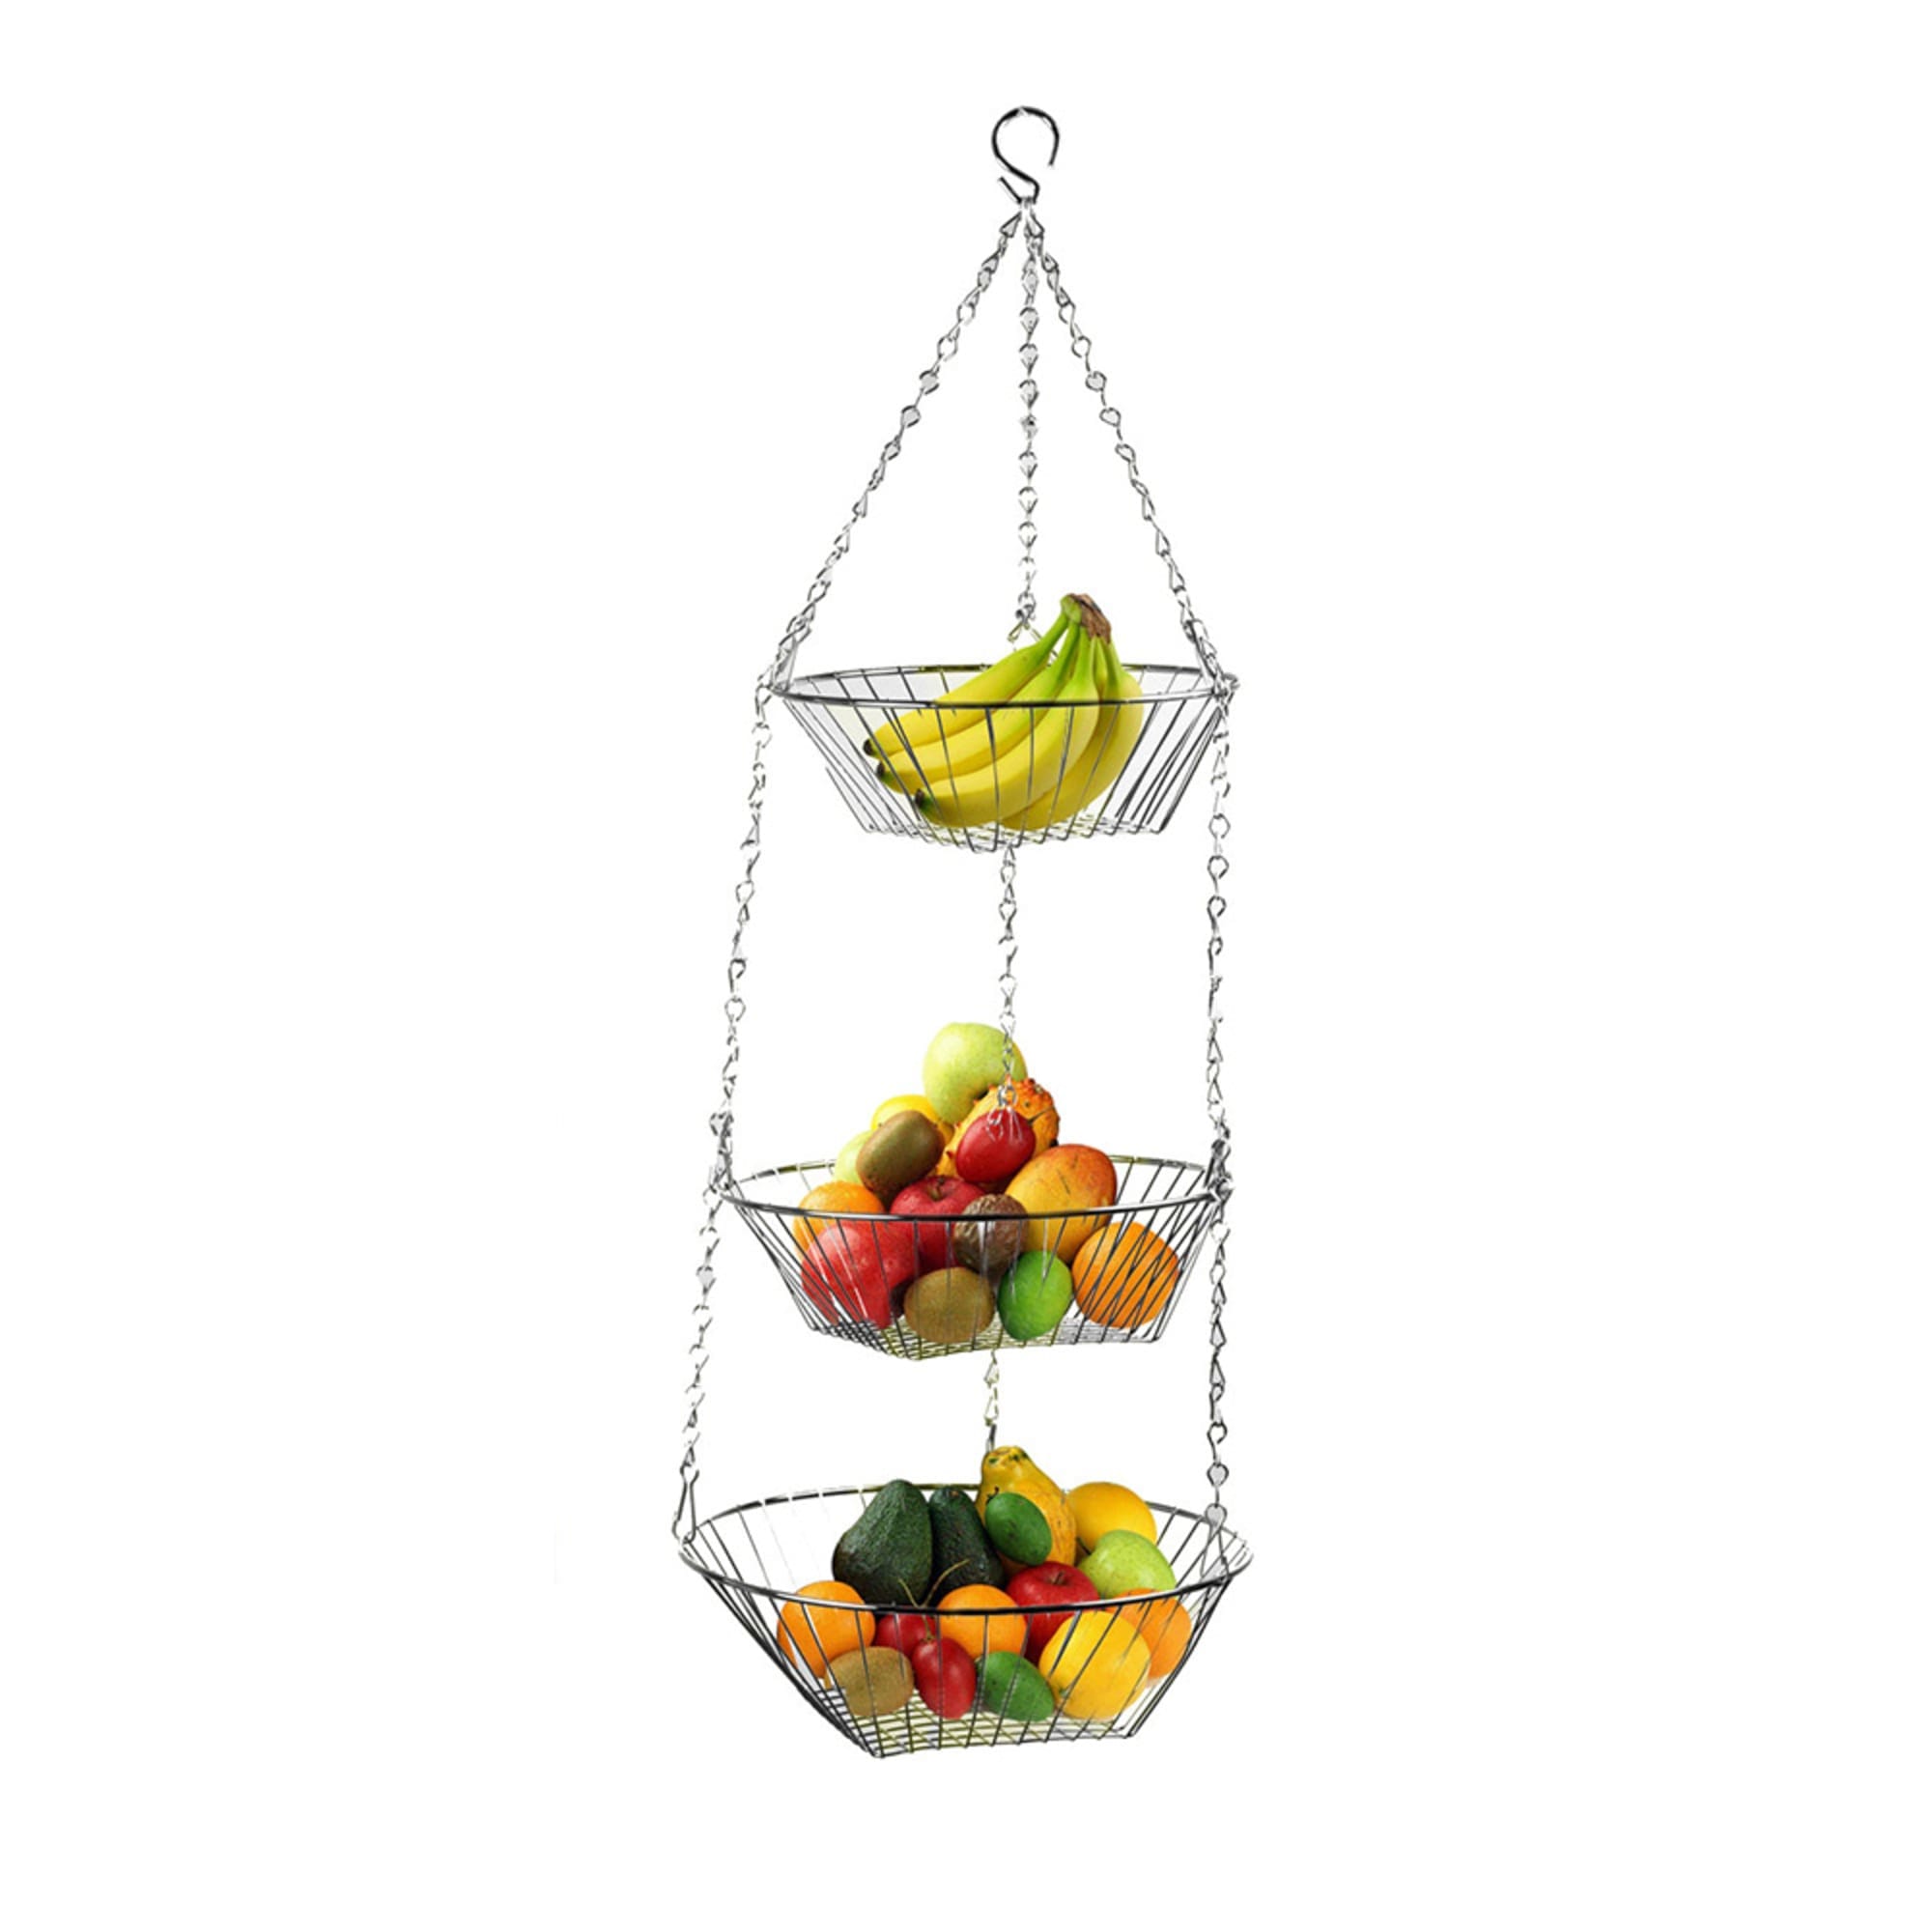 Home Basics  3 Tier Wire Hanging Round Fruit Basket, Chrome $8.00 EACH, CASE PACK OF 12